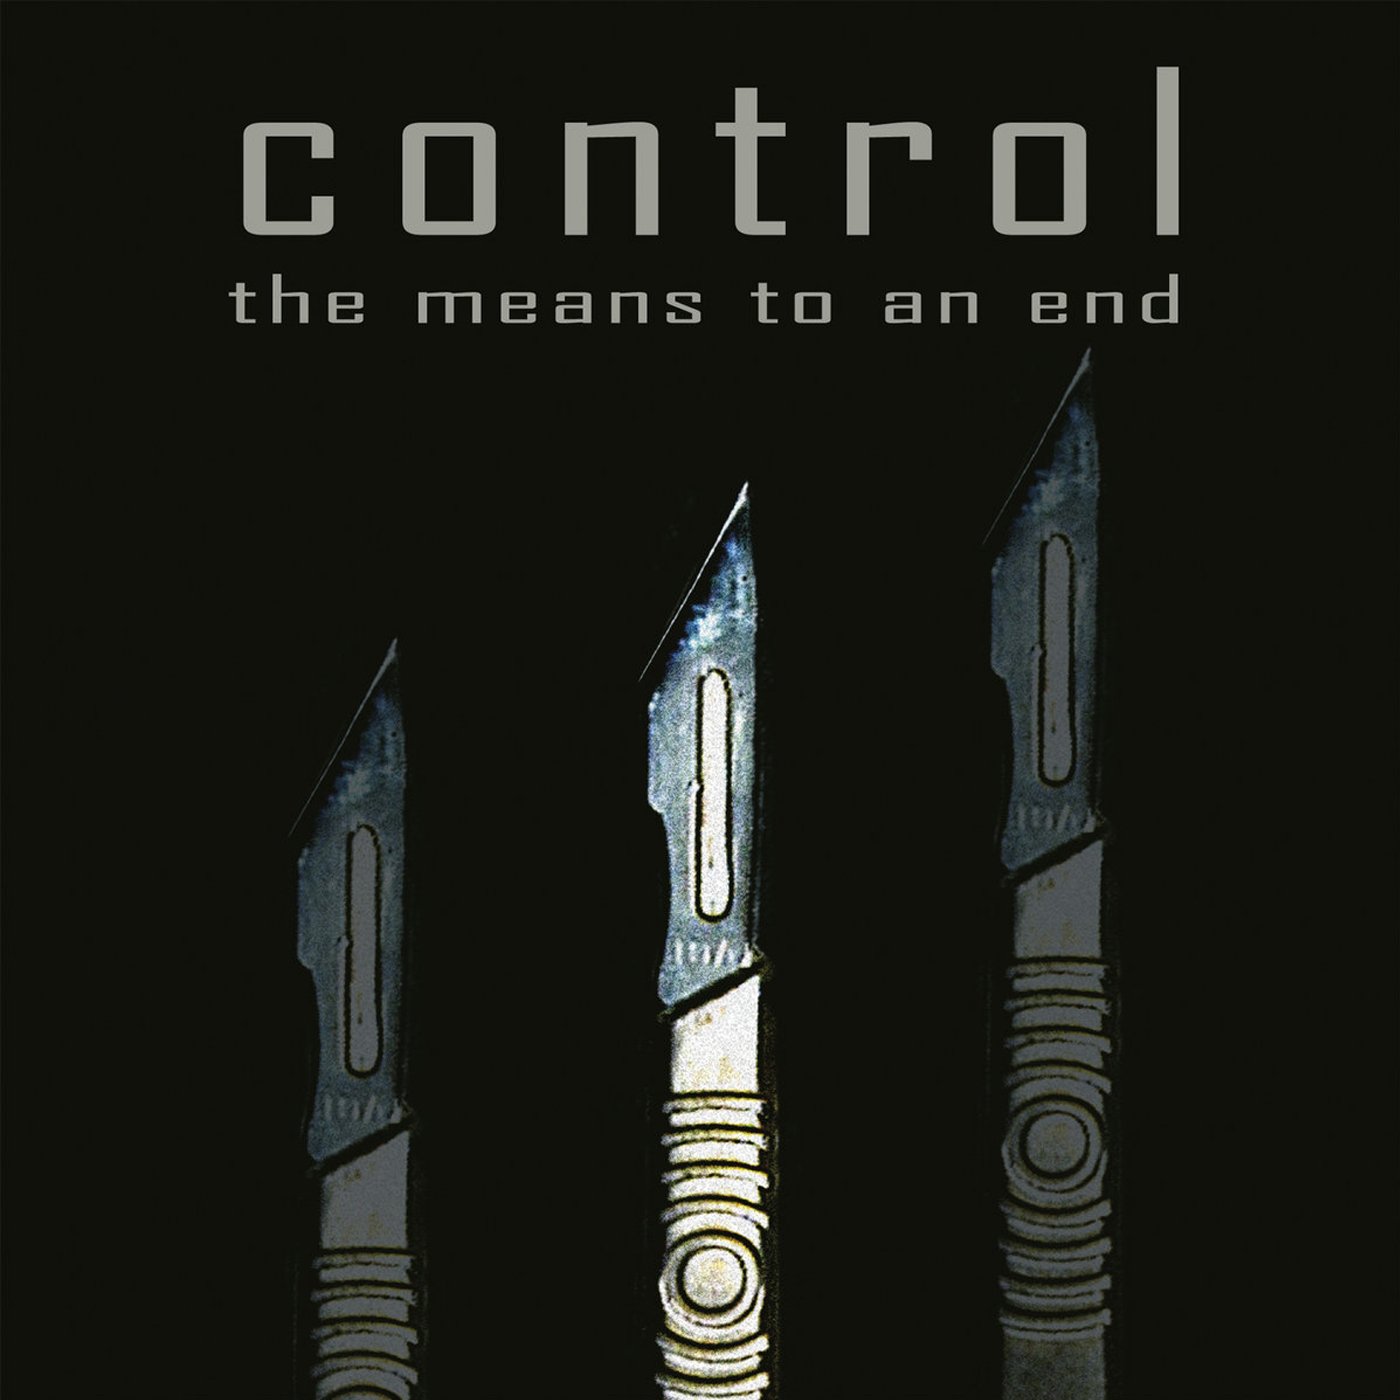 Means to an end. A means to an end. I last Control. The end.